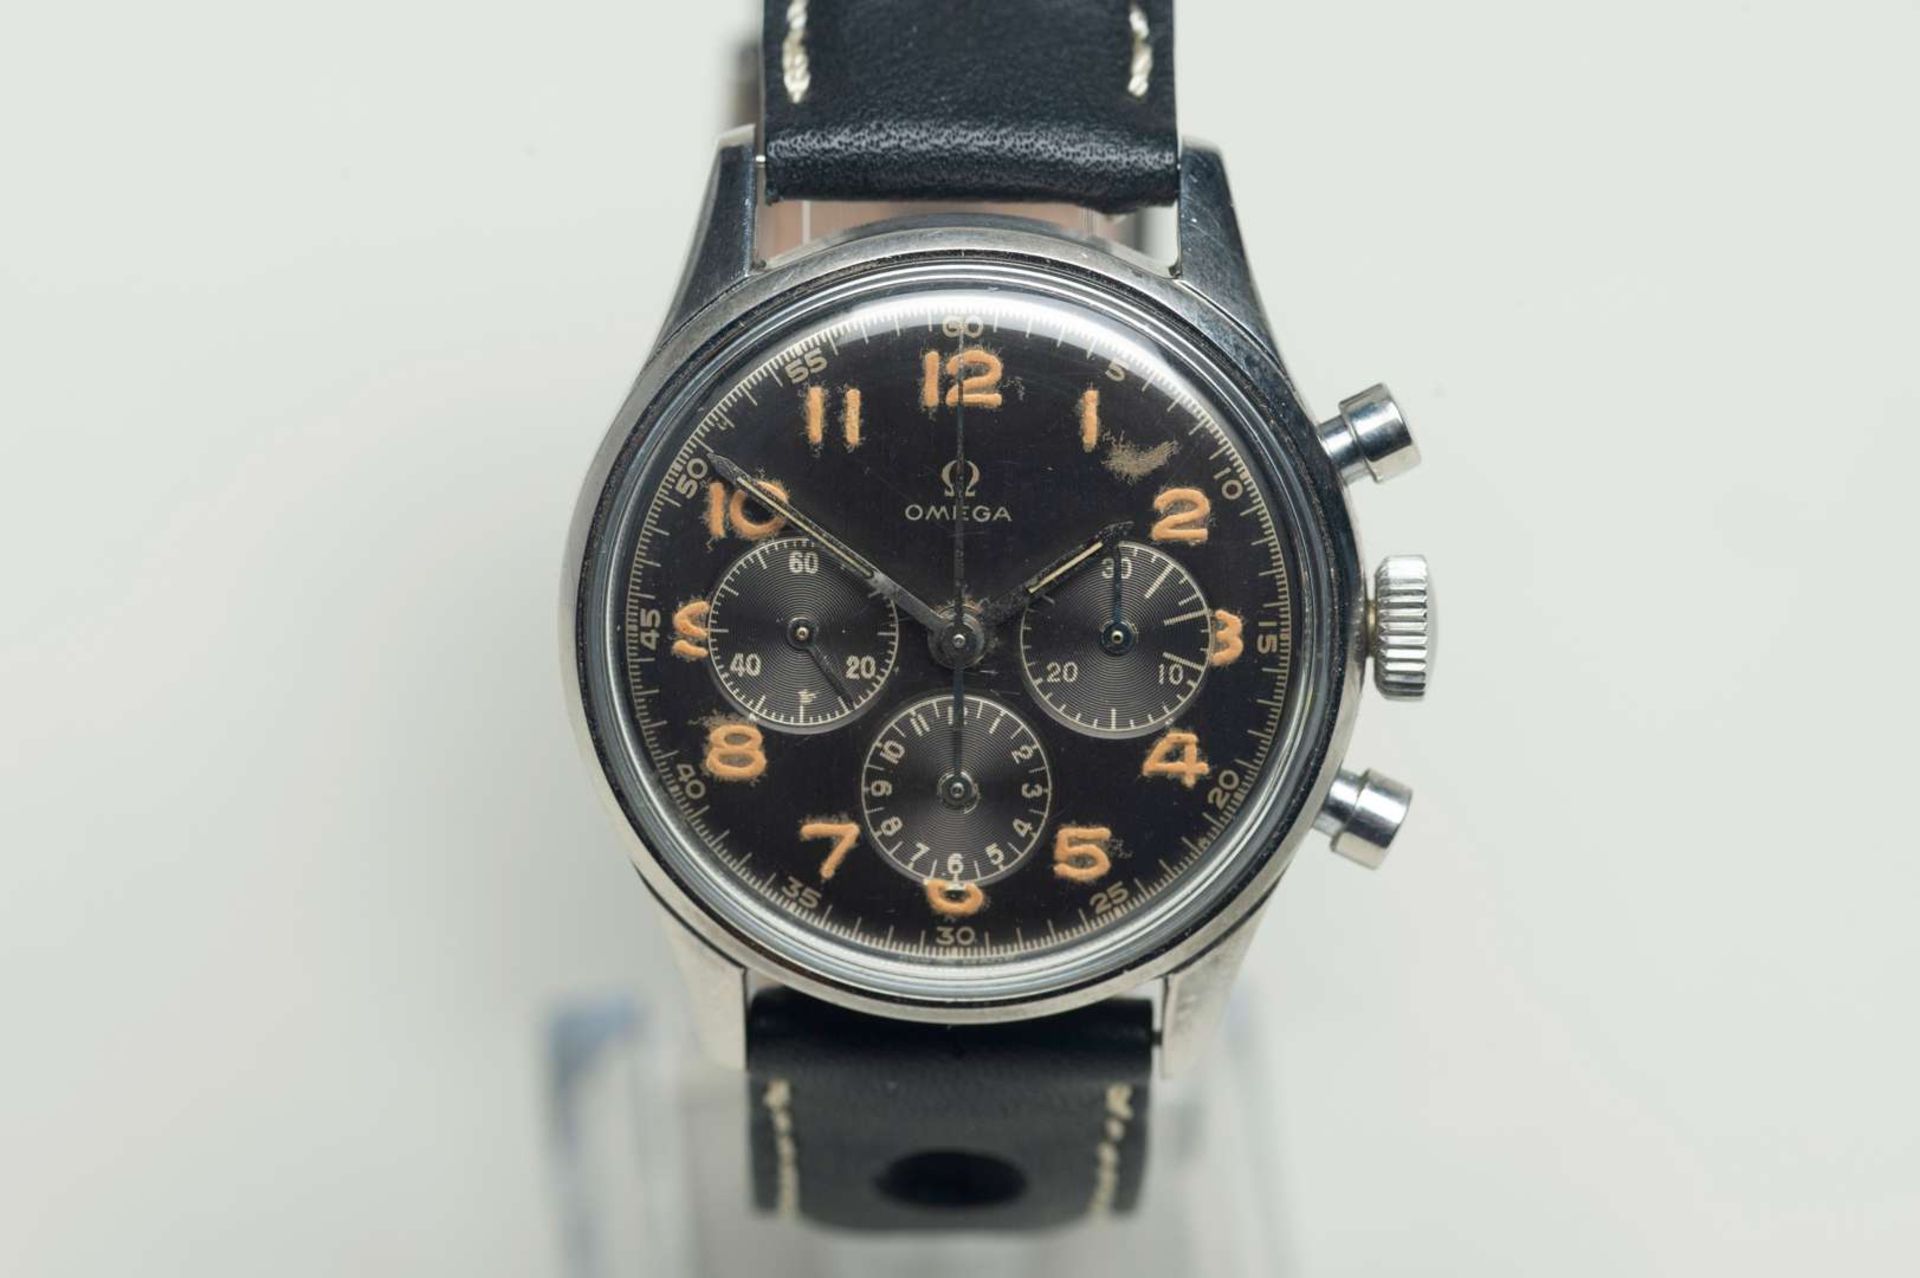 OMEGA. a mid 20th century stainless steel, two button chronograph wristwatch.